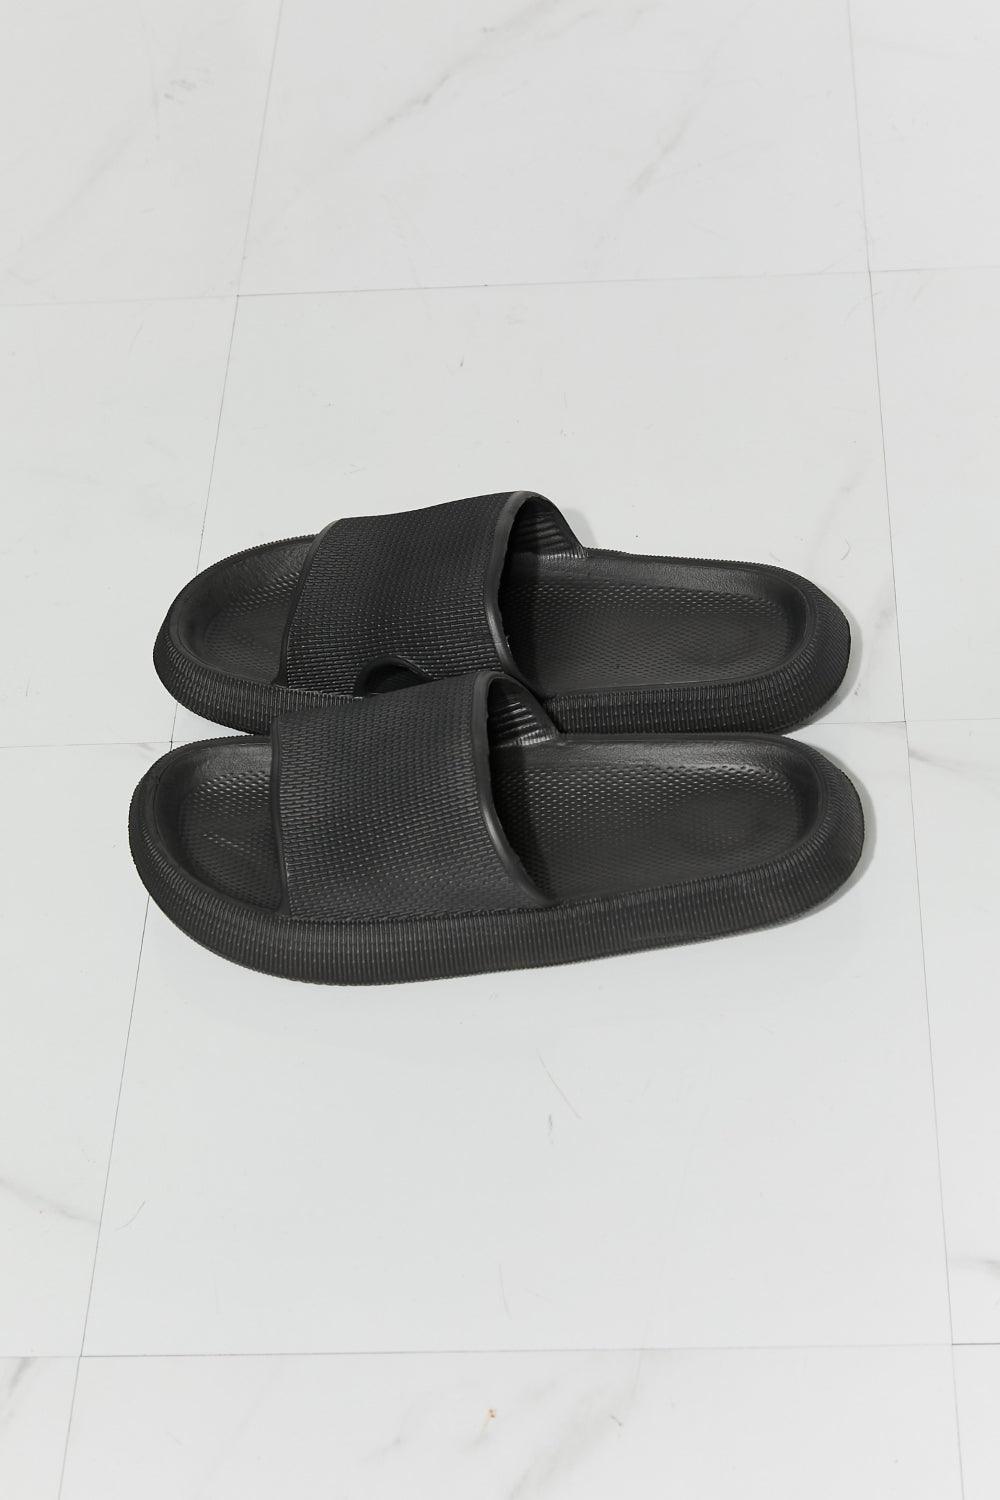 MMShoes Arms Around Me Open Toe Slide in Black - Glamorous Boutique USA L.L.C.